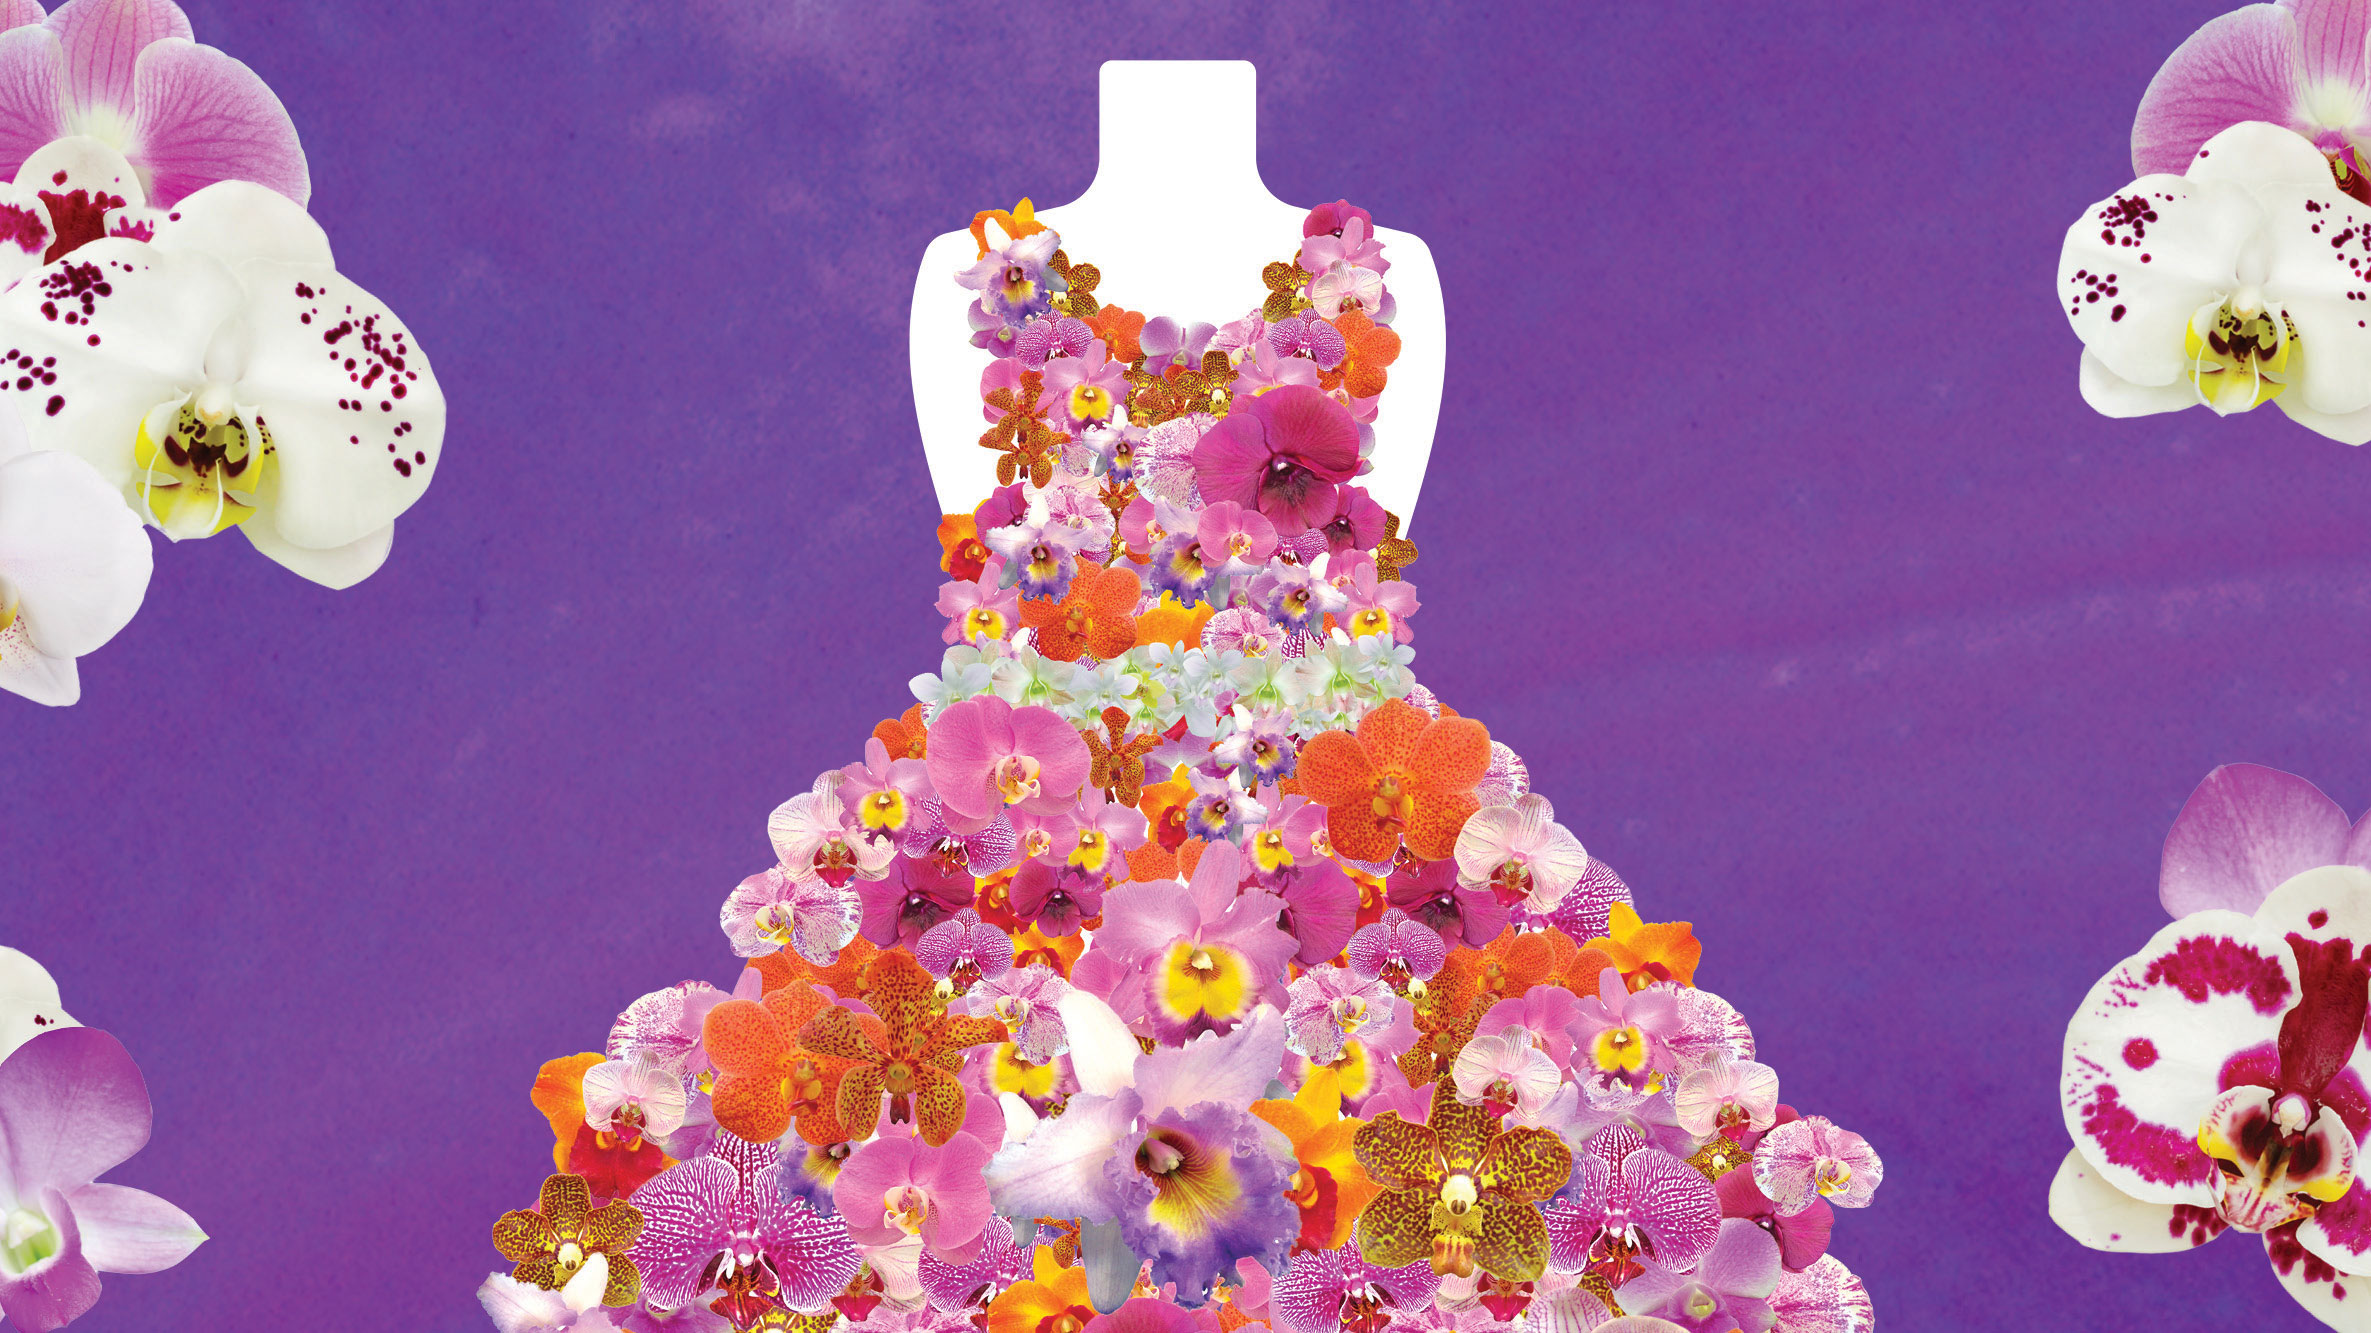 A dress fashioned from dozens of pink and red orchids against a purple backdrop